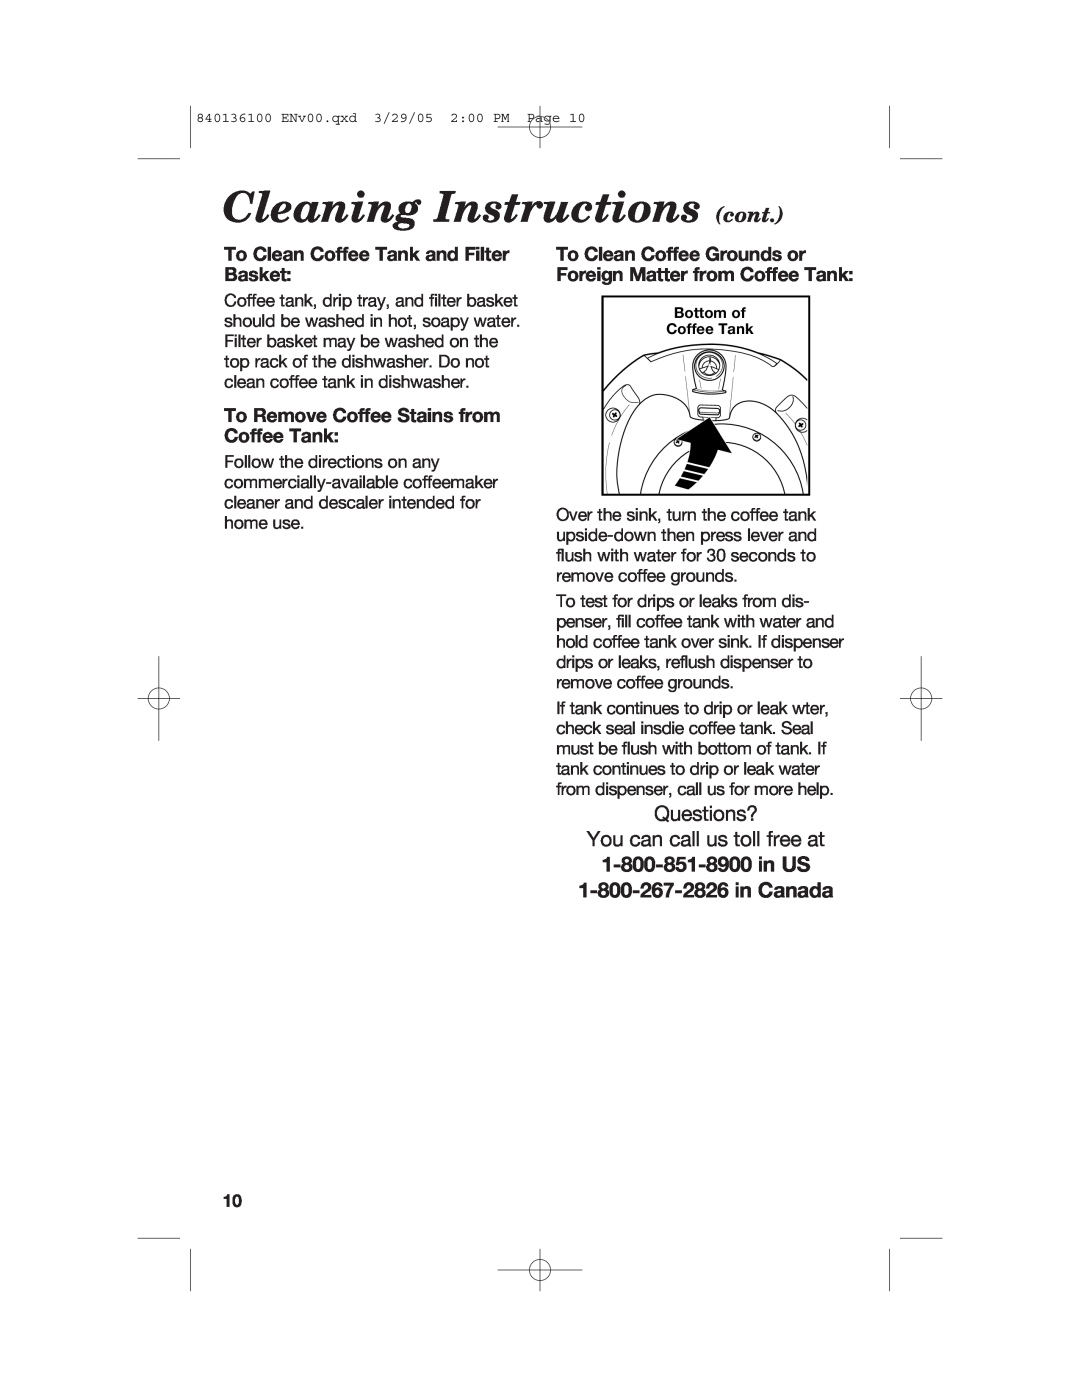 Hamilton Beach 840136100 manual Cleaning Instructions cont, Questions? You can call us toll free at 